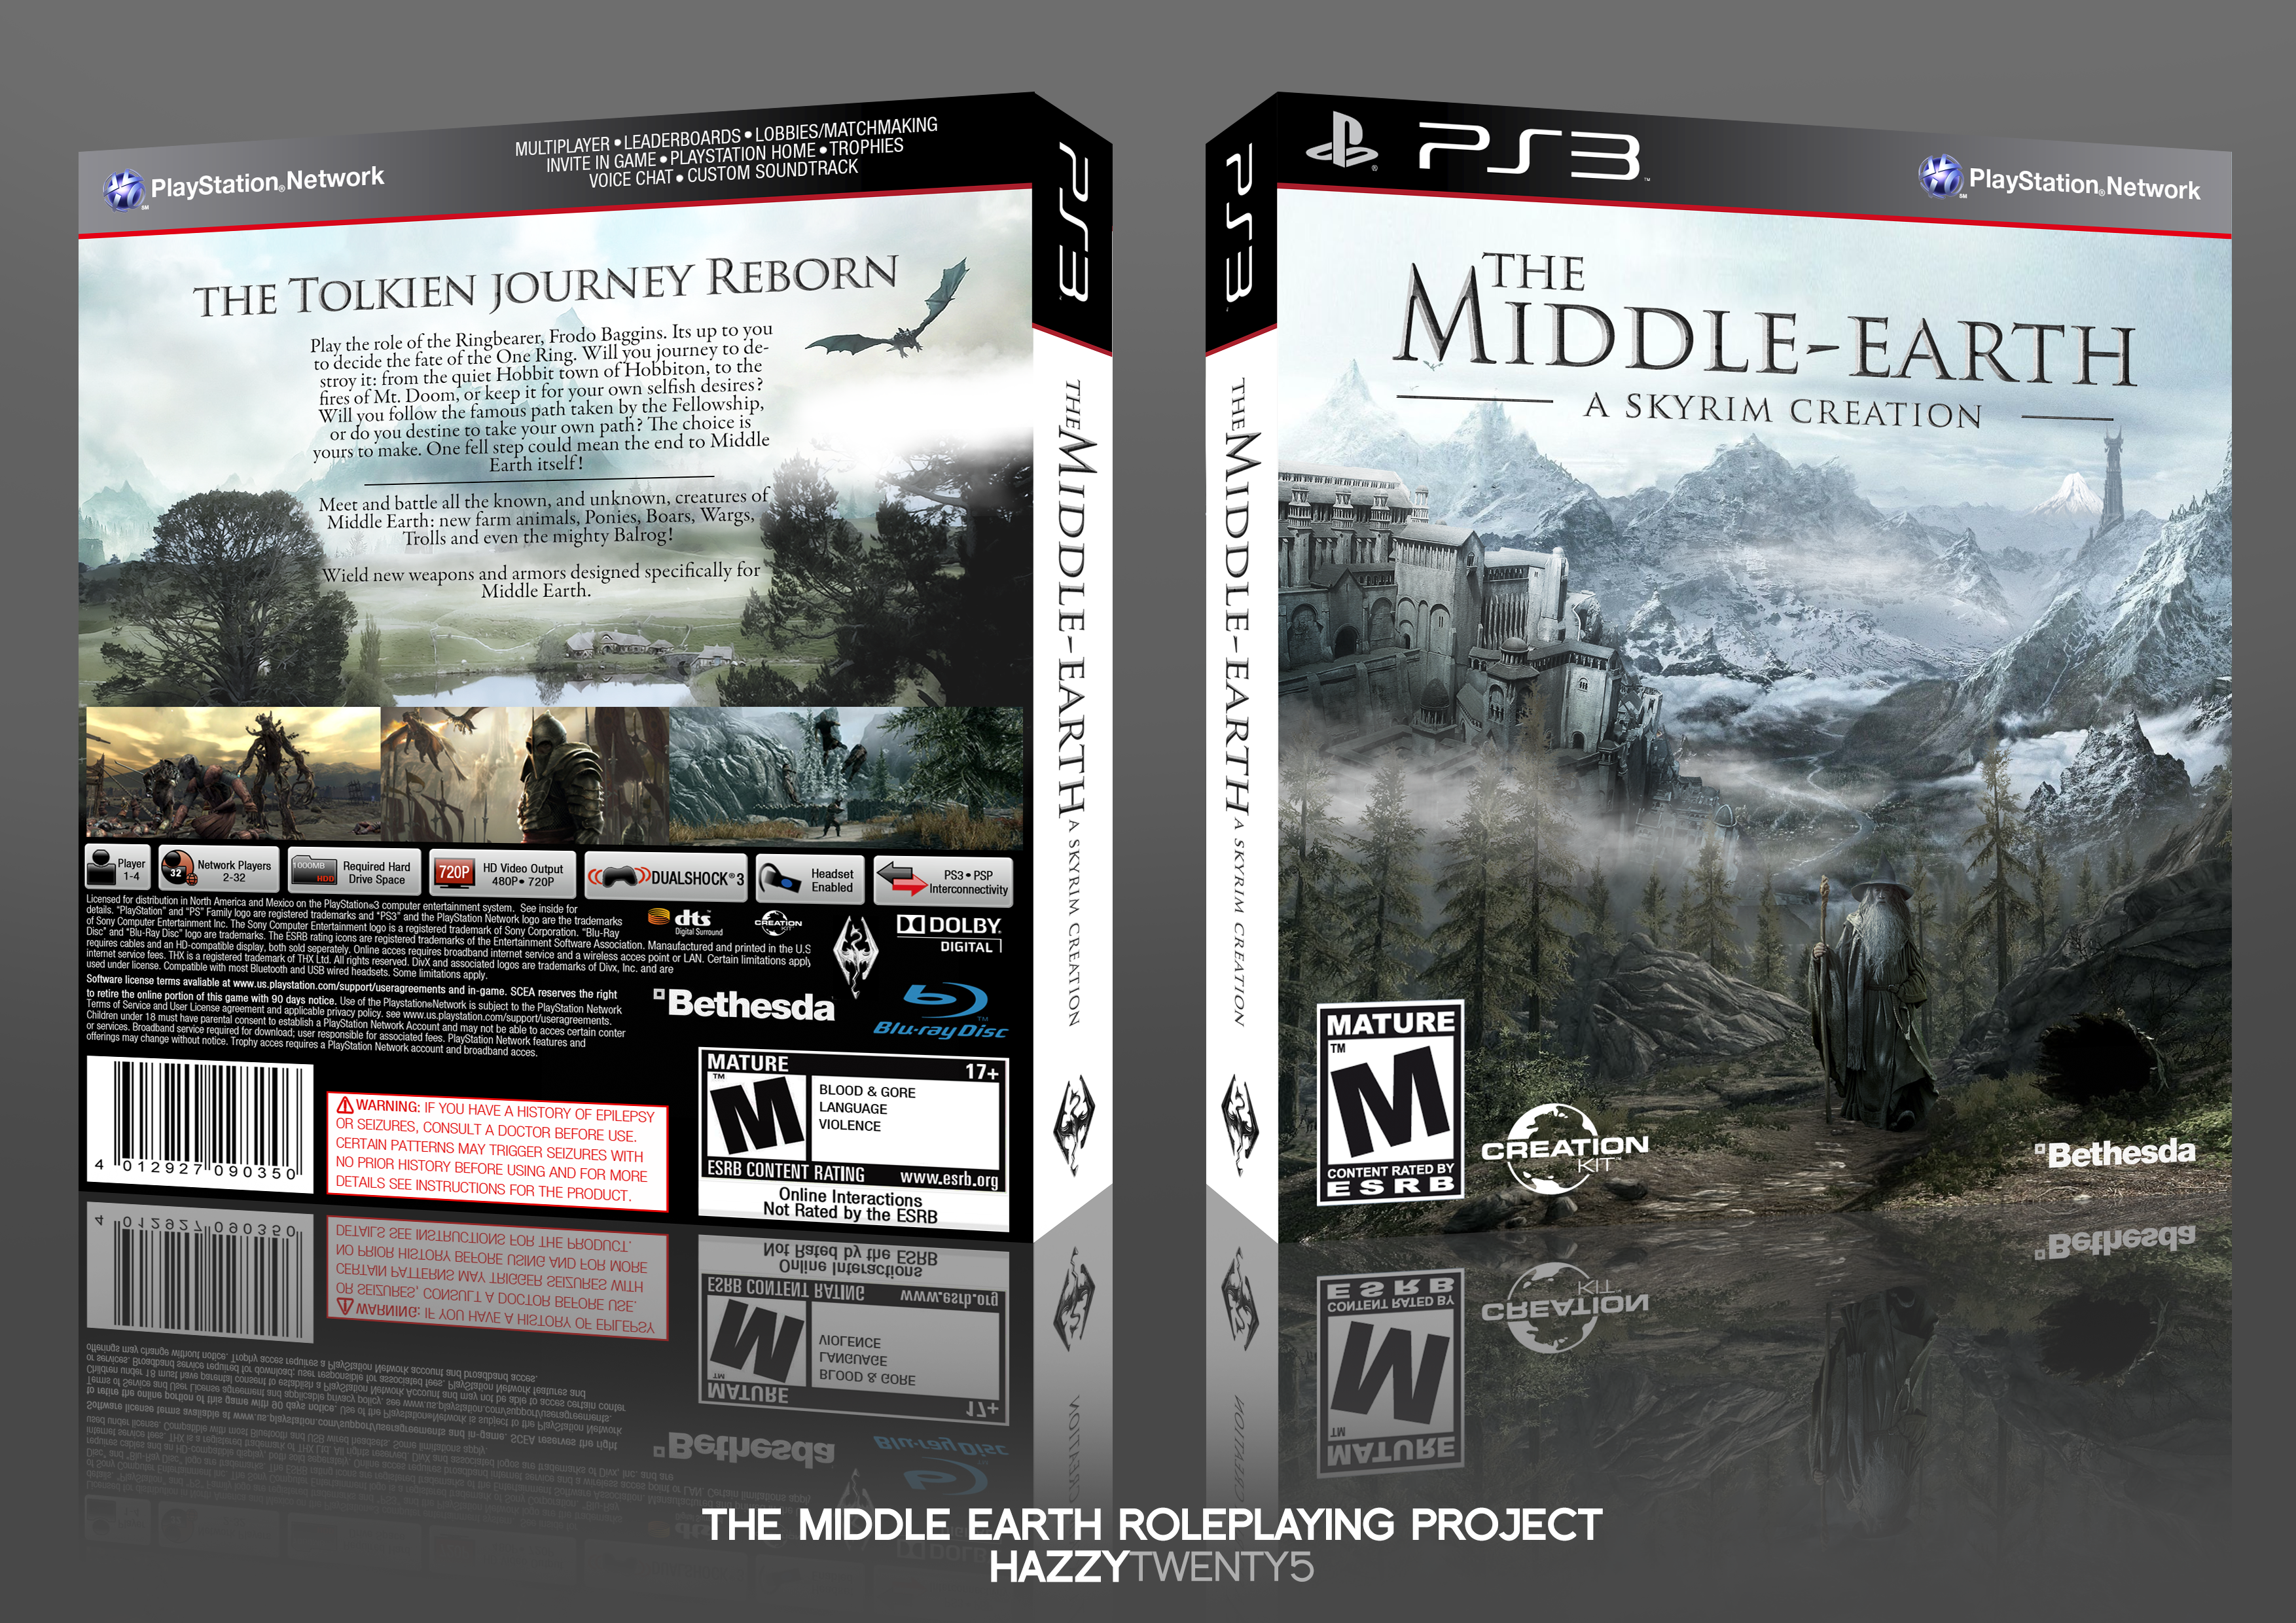 The Middle-Earth - A Skyrim Creation box cover